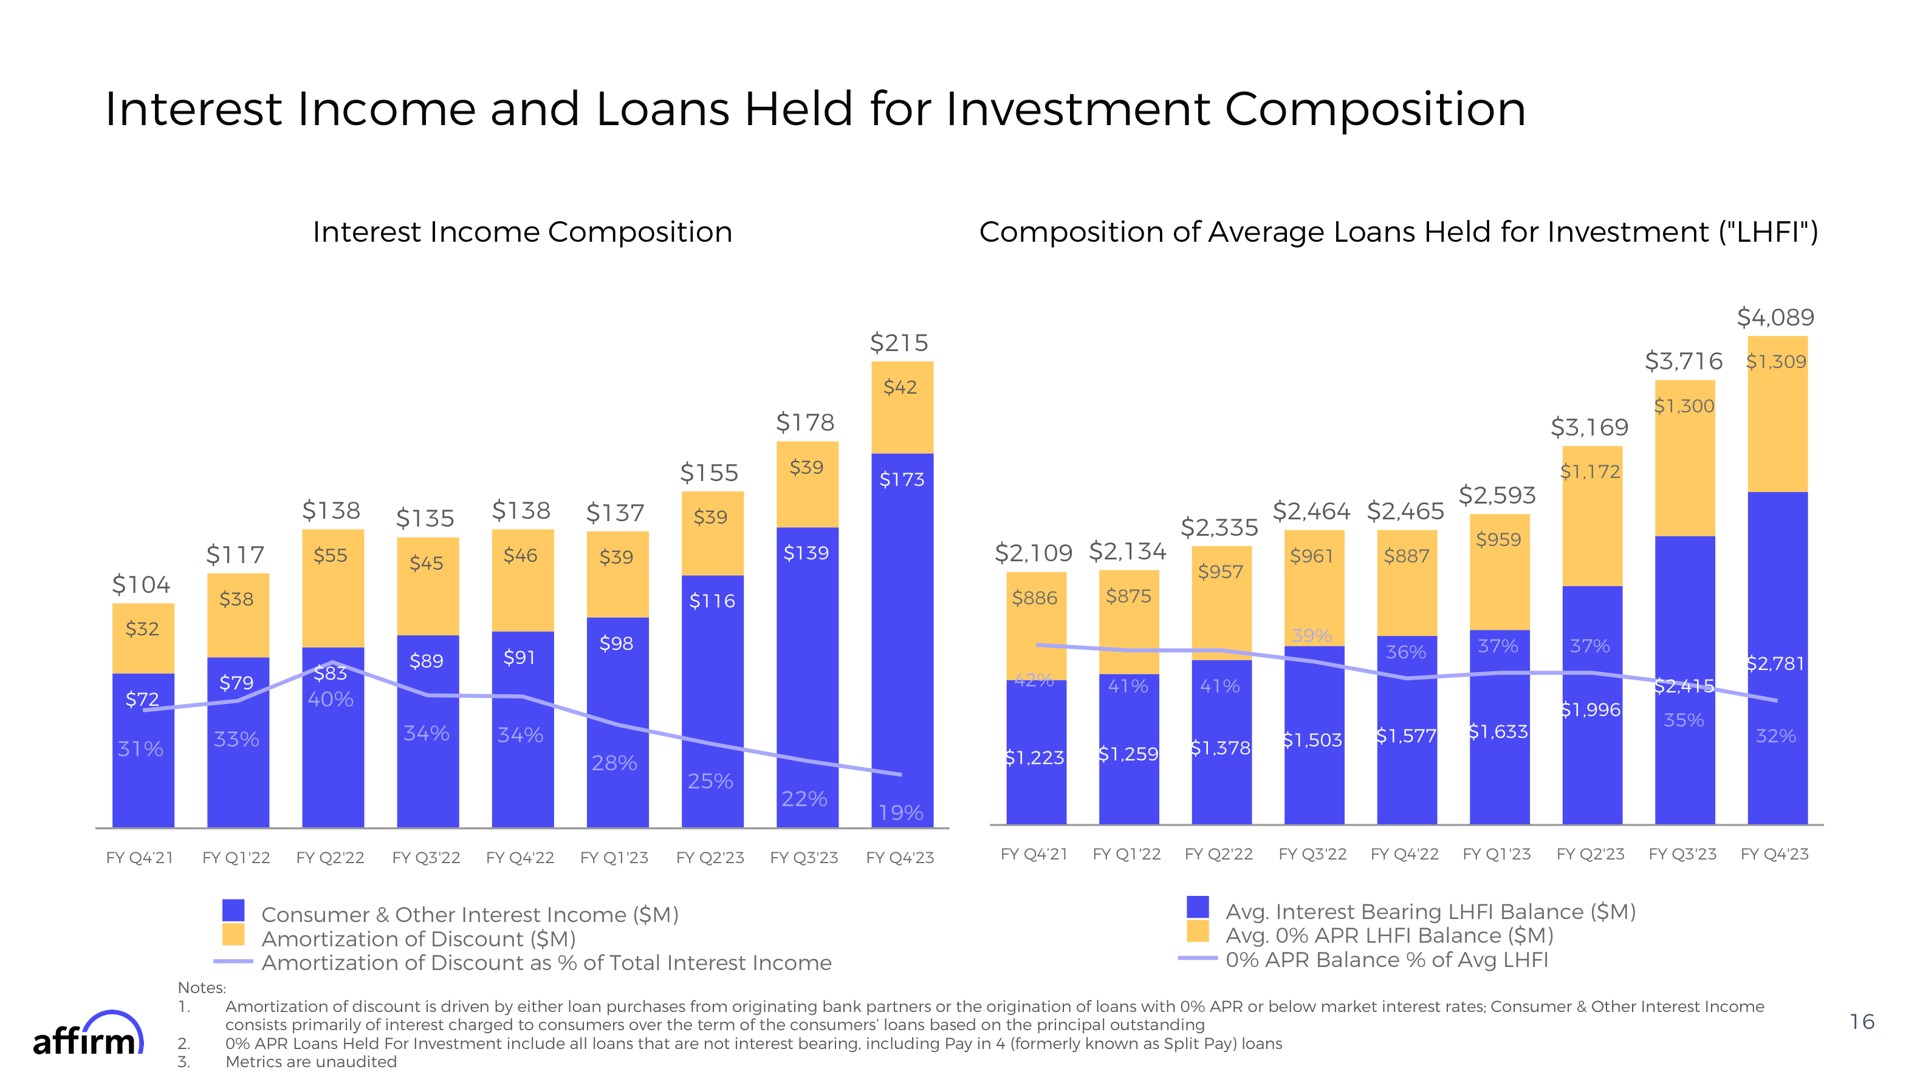 interest income and loans held for investment composition interest income composition composition of average loans held for investment | Affirm